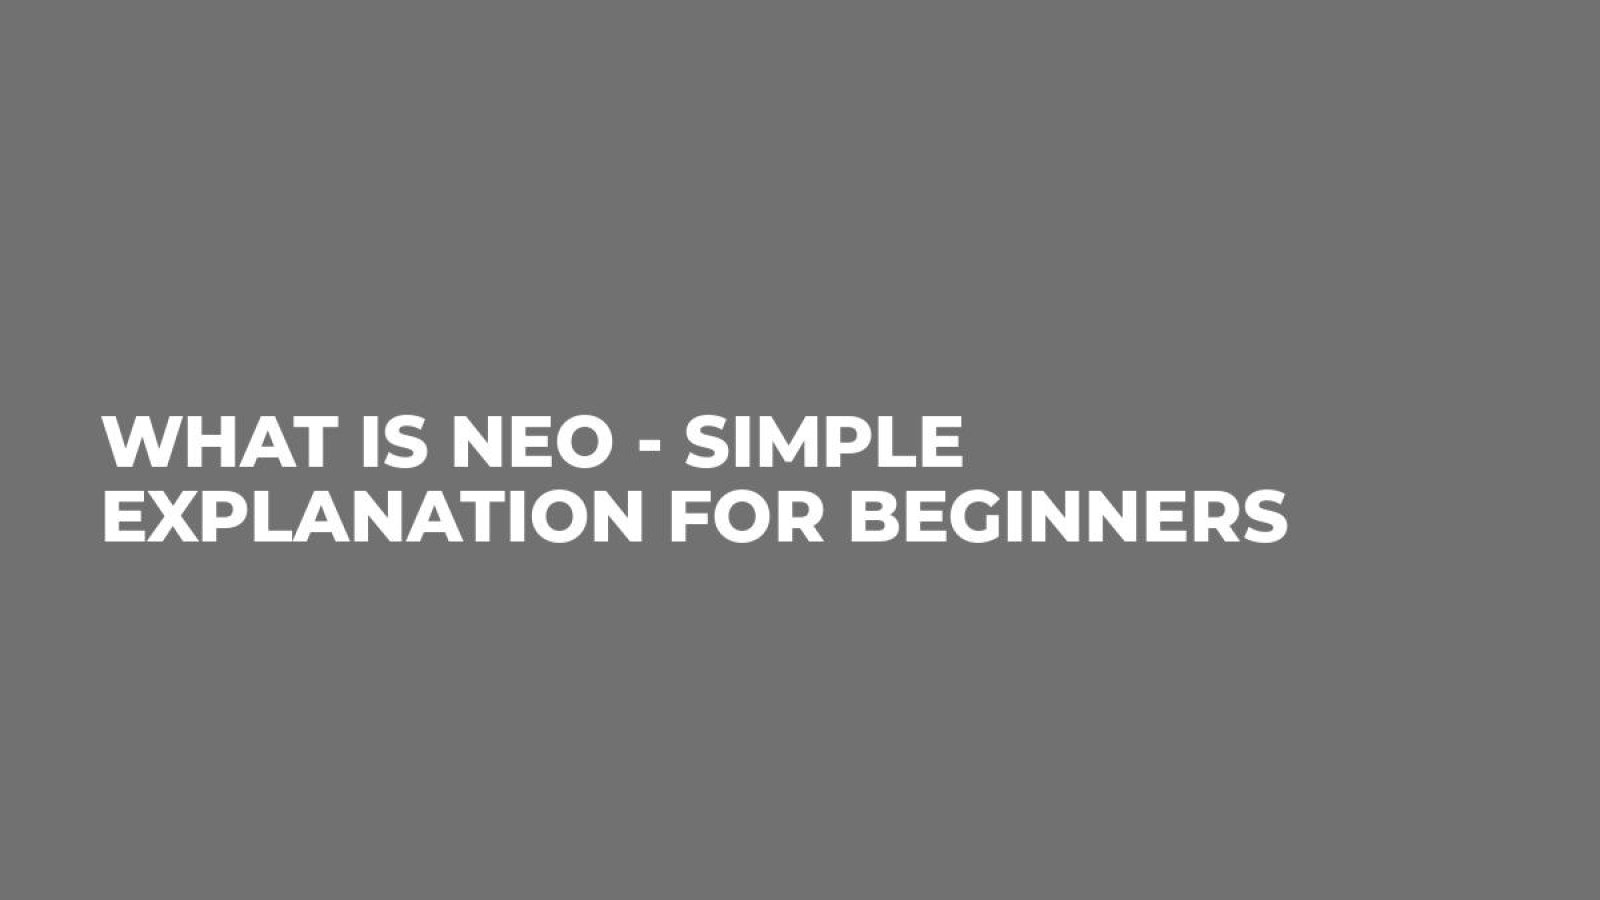 What is NEO - Simple Explanation for Beginners